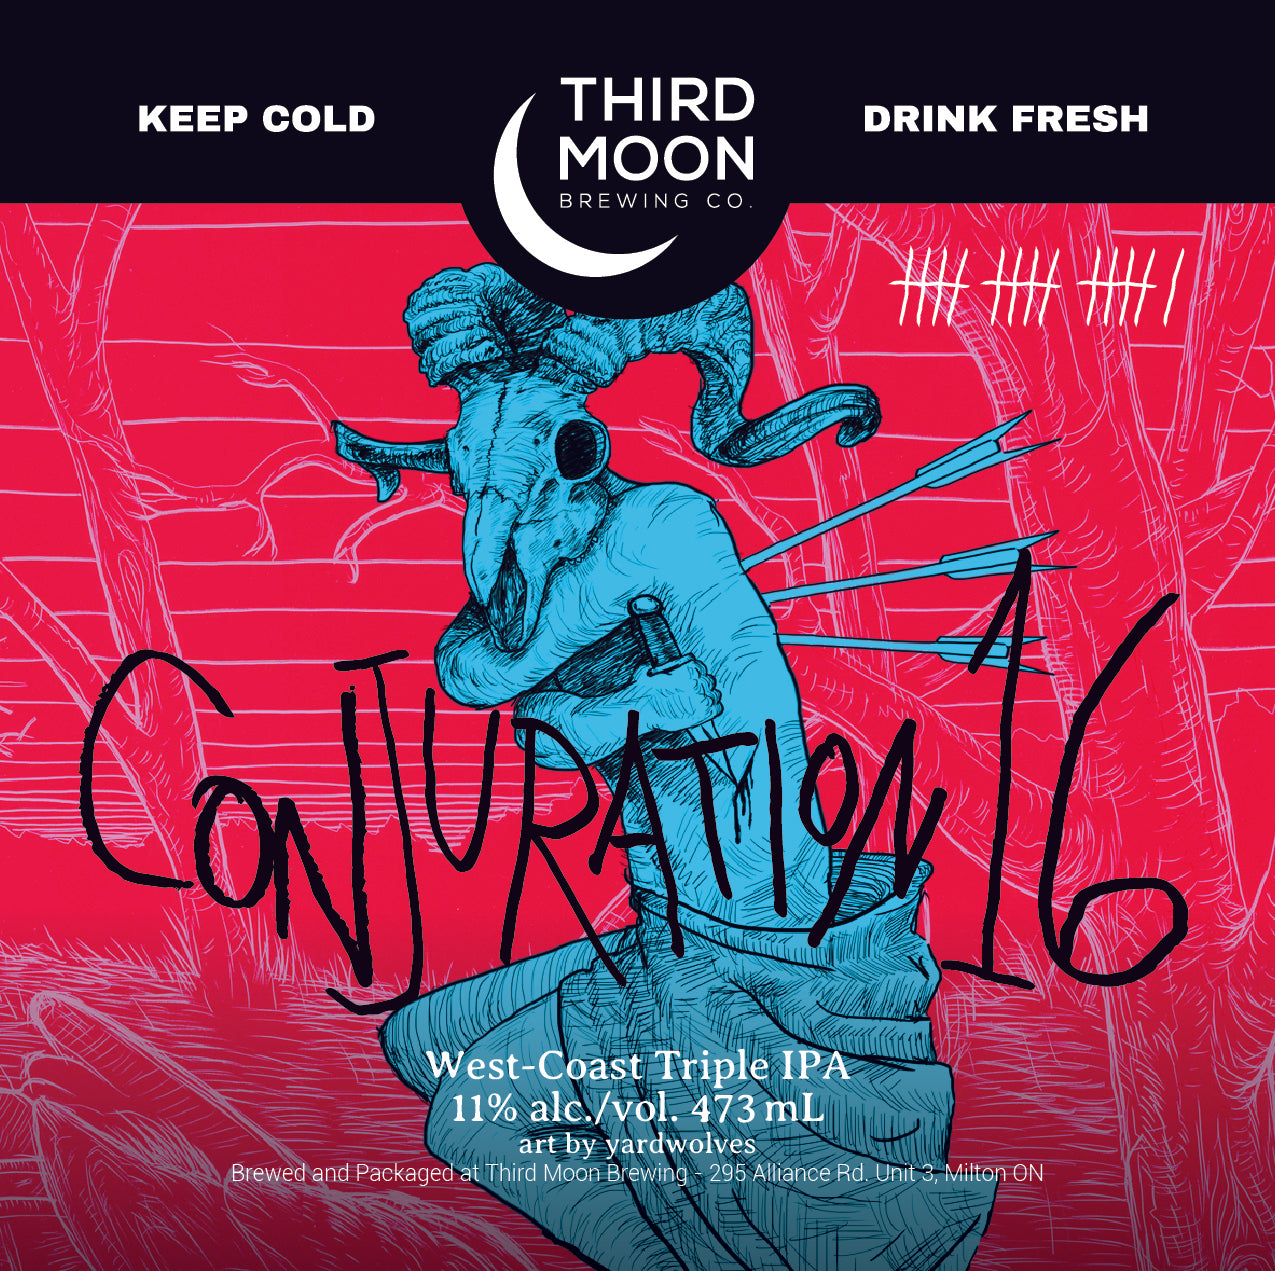 Triple IPA - 4-pk of "Conjuration 16" tall cans